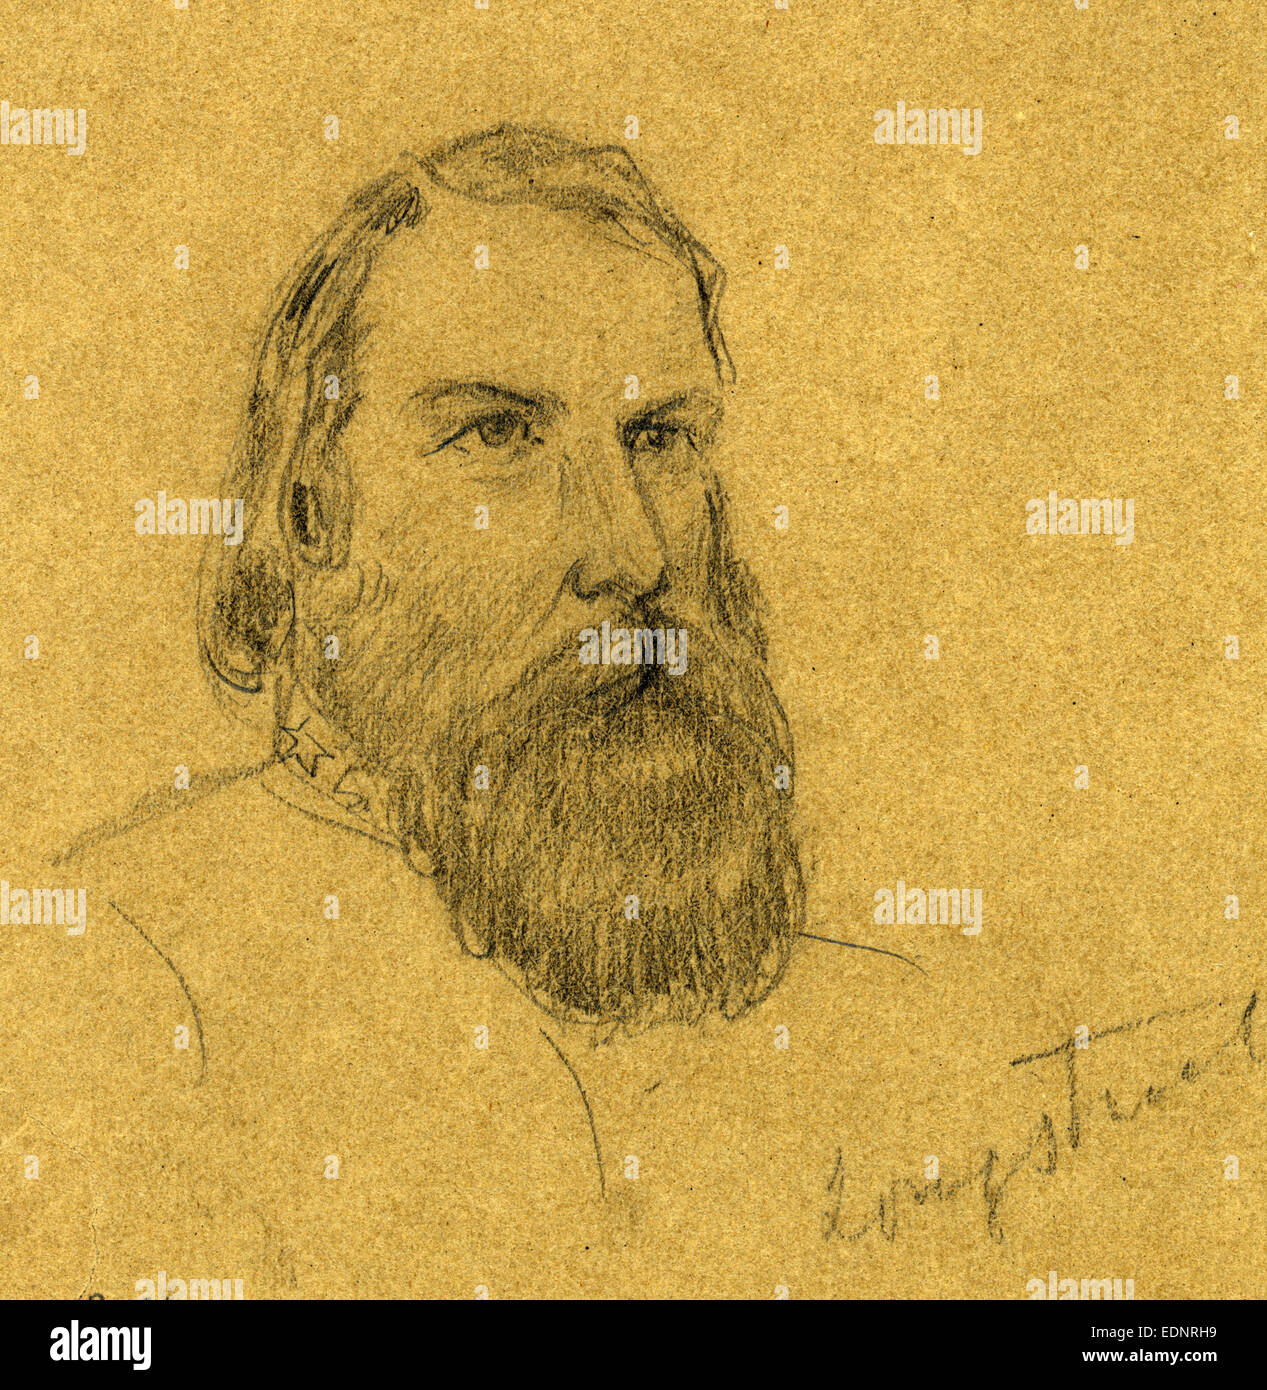 Confederate General James Longstreet, 1861-1865, drawing, 1862-1865, by Alfred R Waud, 1828-1891, an american artist famous for his American Civil War sketches, America, US Stock Photo